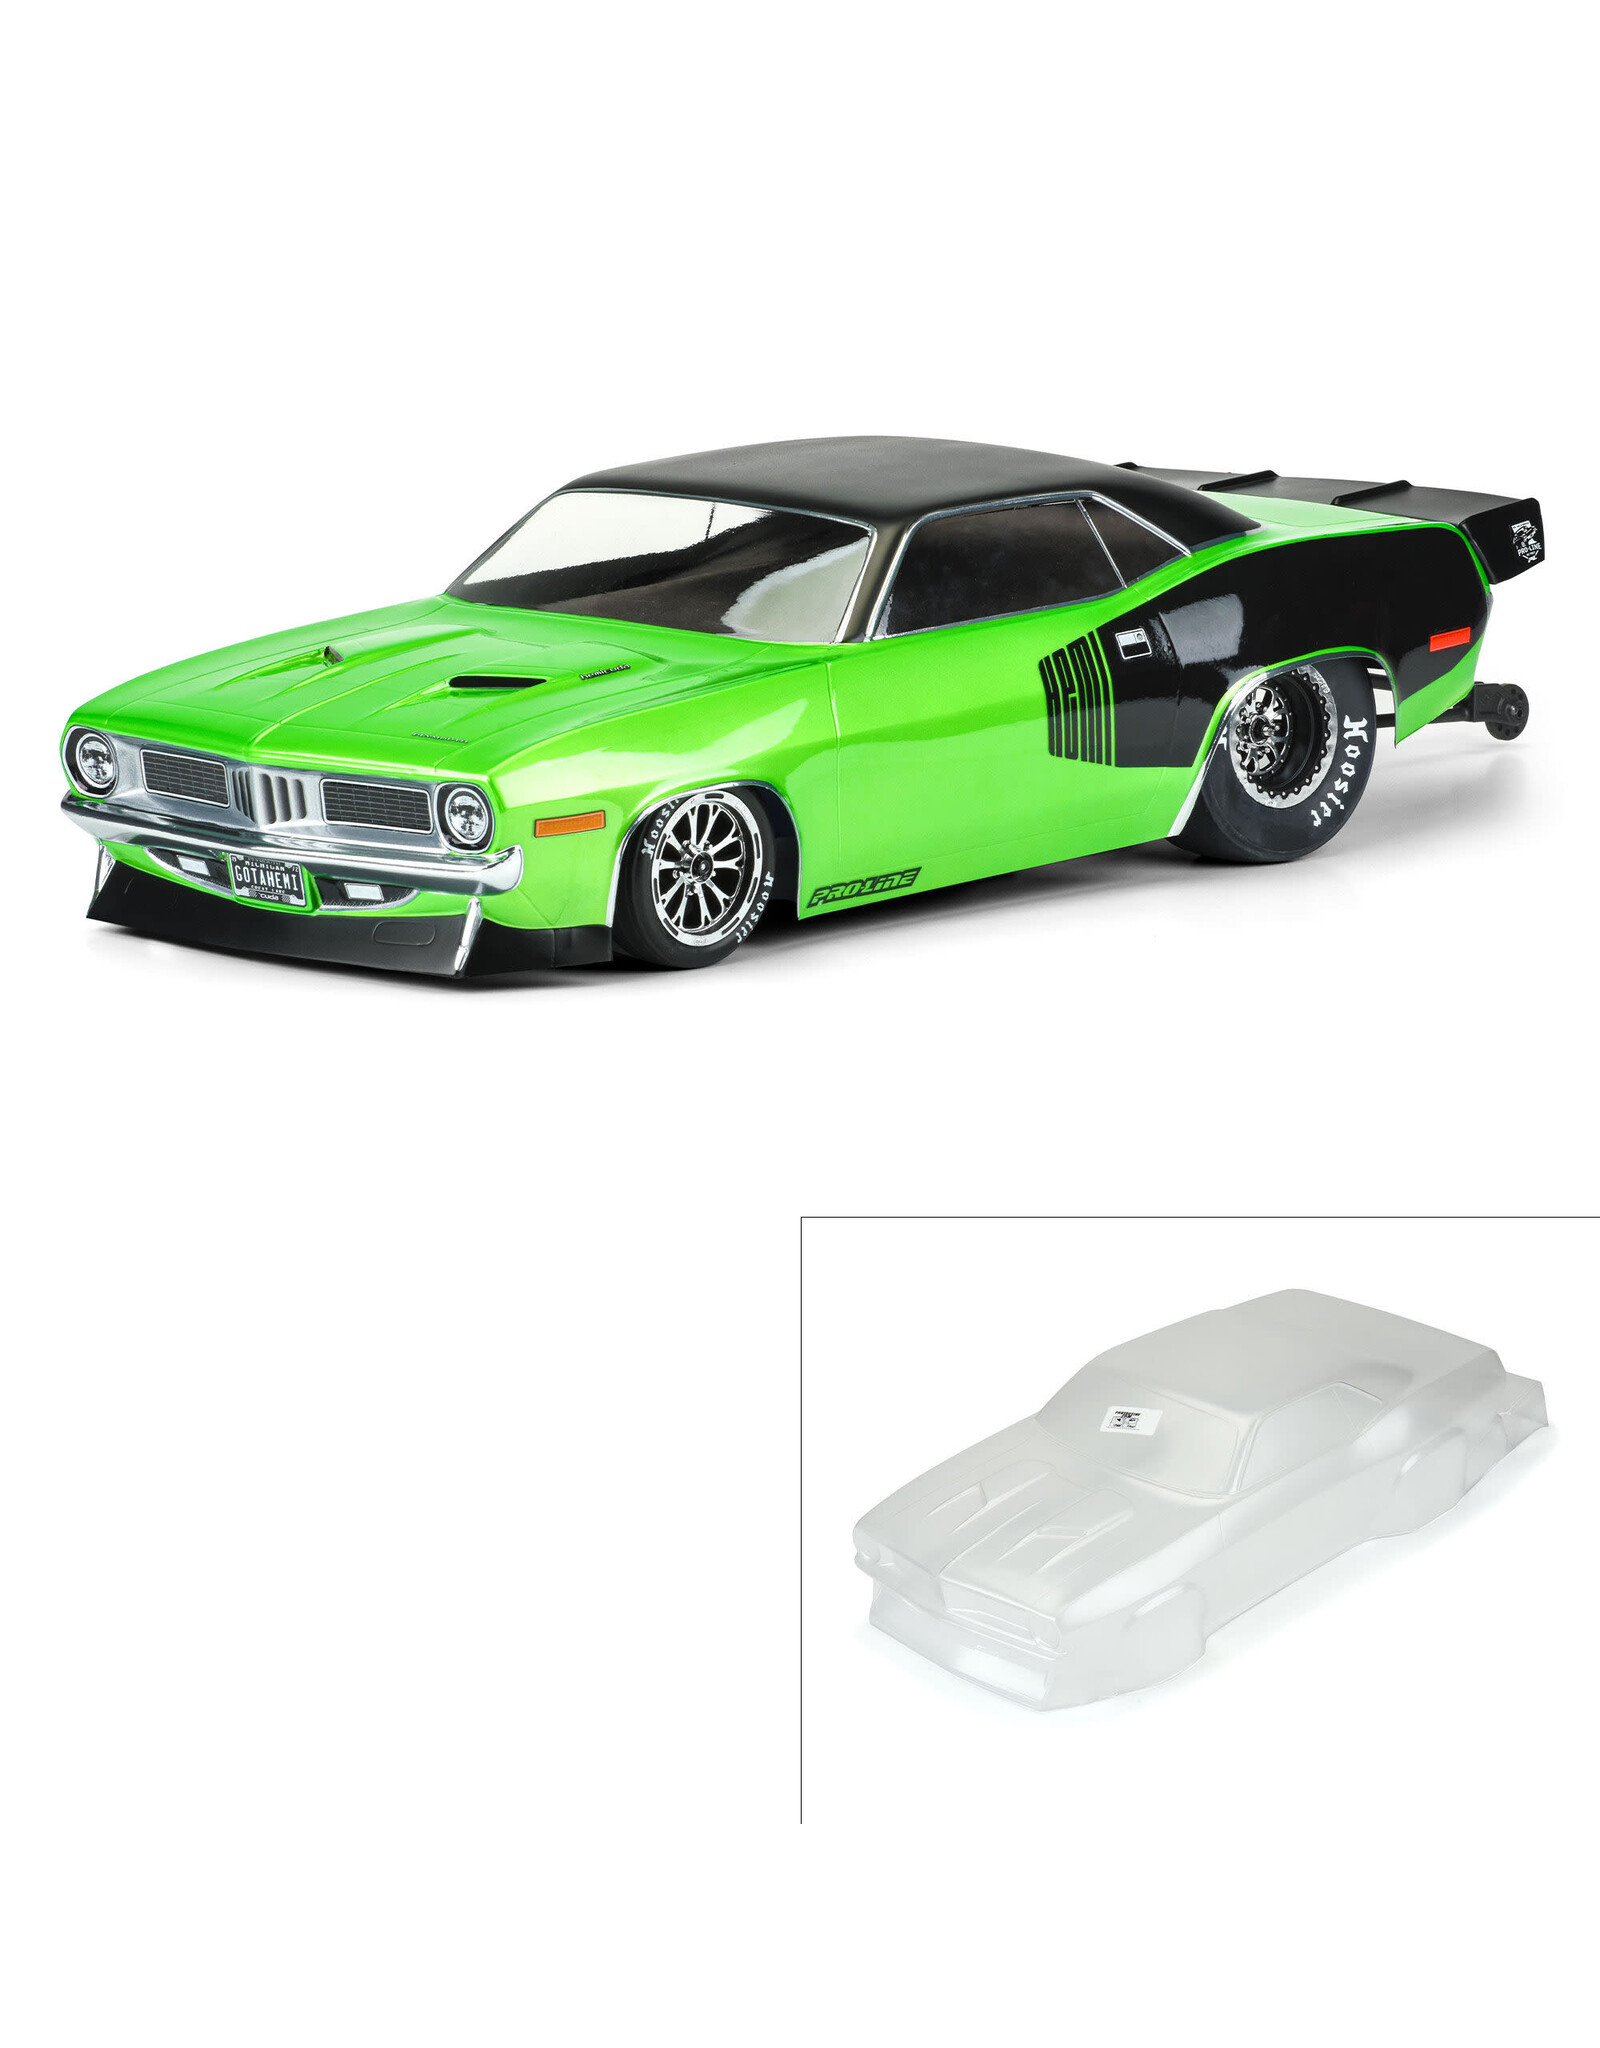 Pro-Line 72 Plymouth Barracuda Clear Body